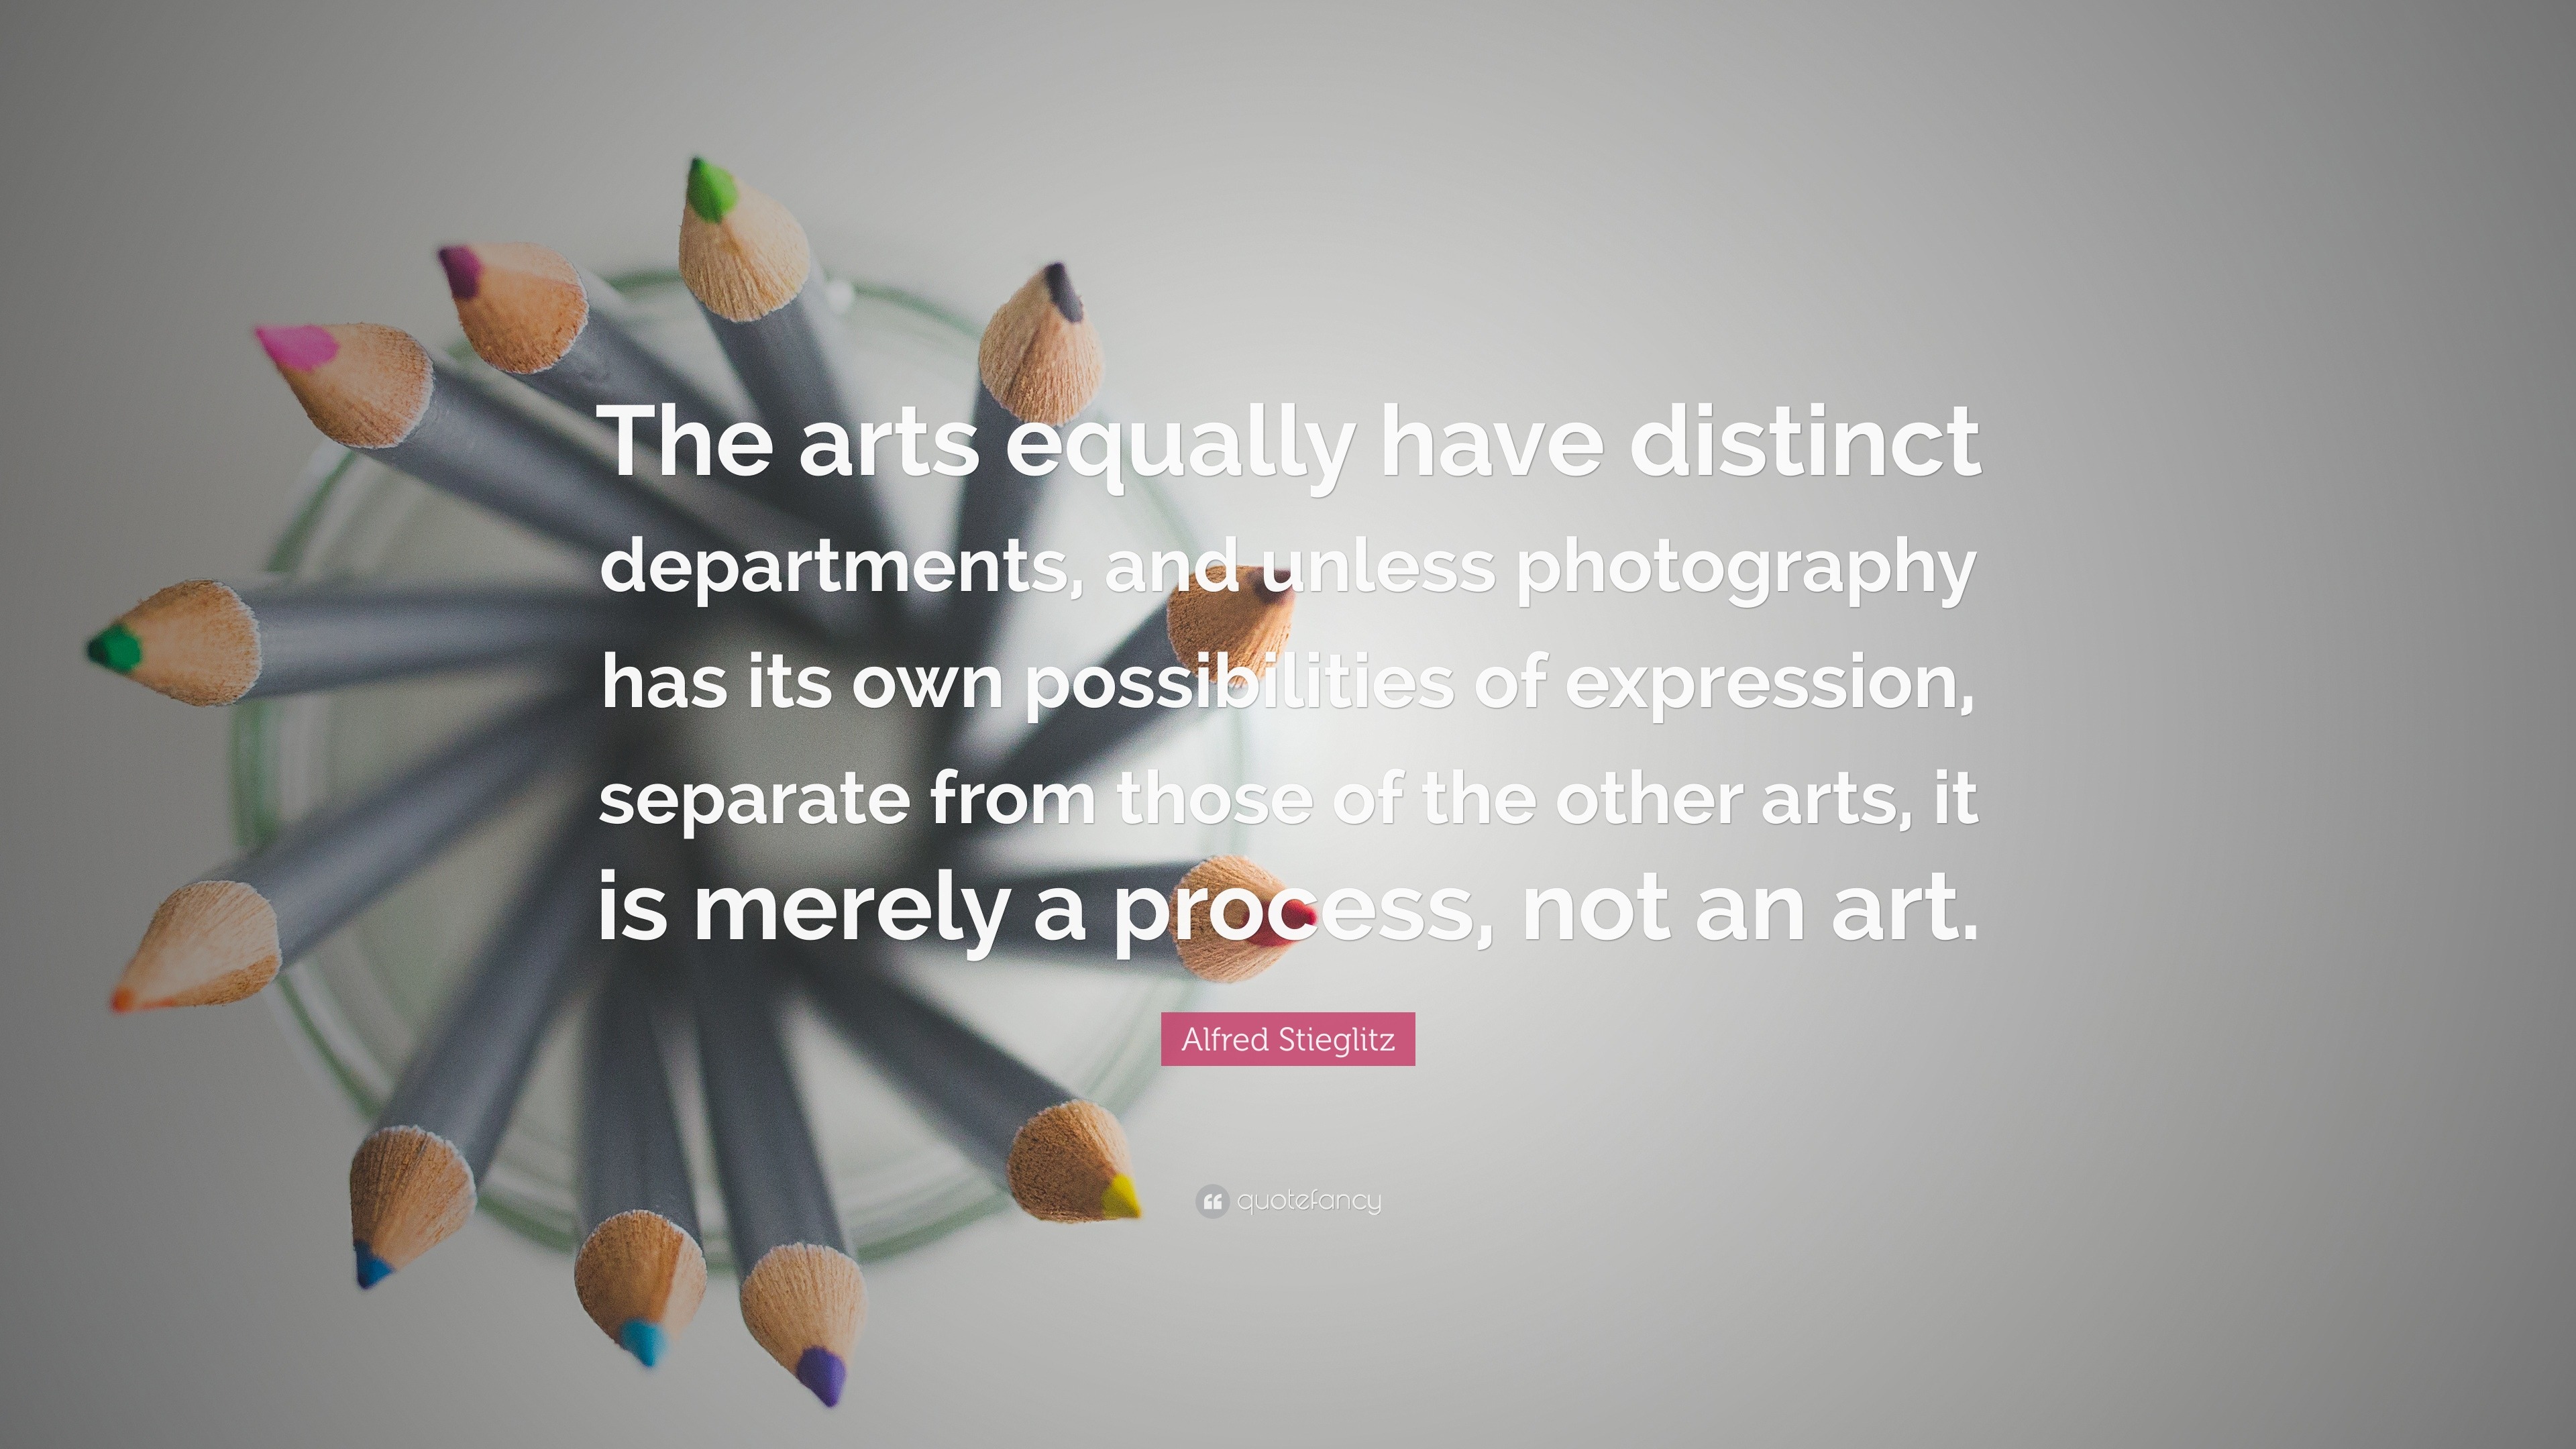 quotes about art expression